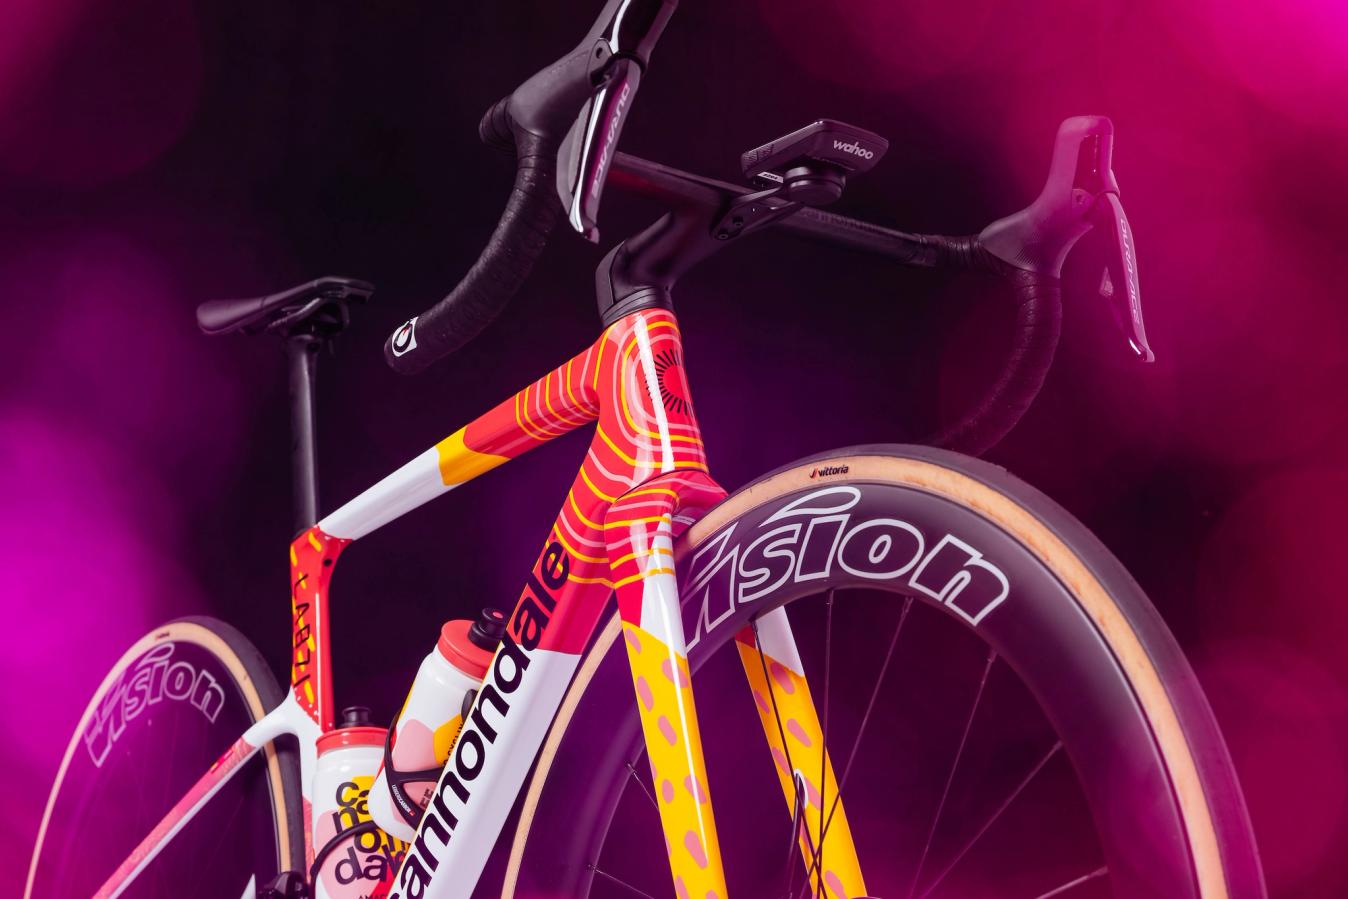 The Cannondale that both teams will ride in 2024 is a colourful affair